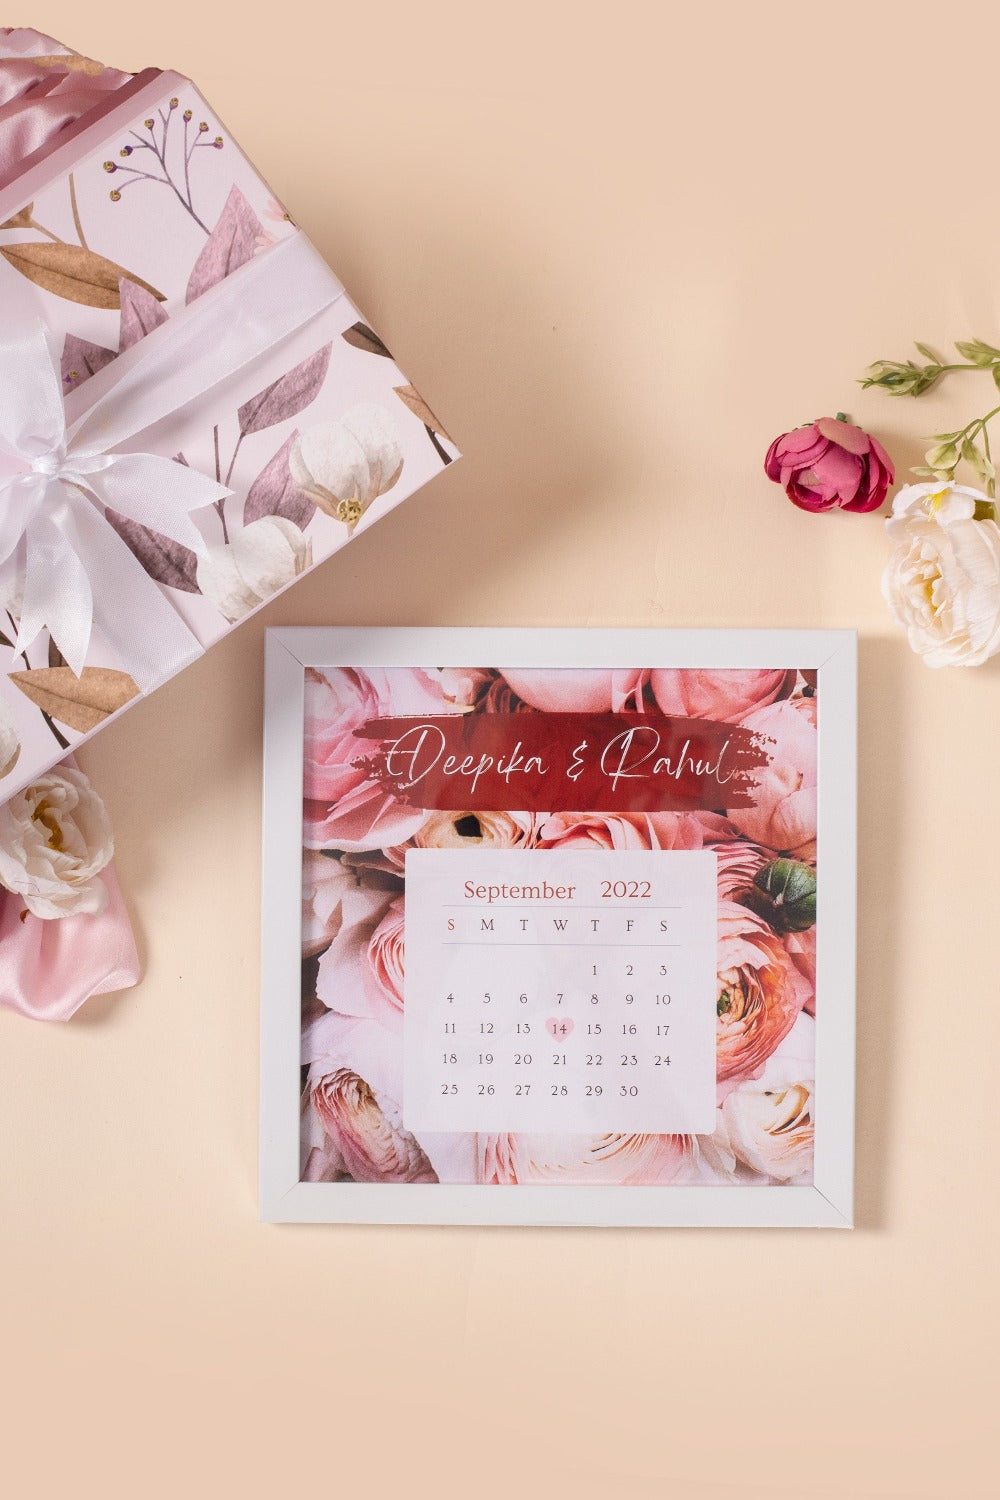 Personalized Date Frame